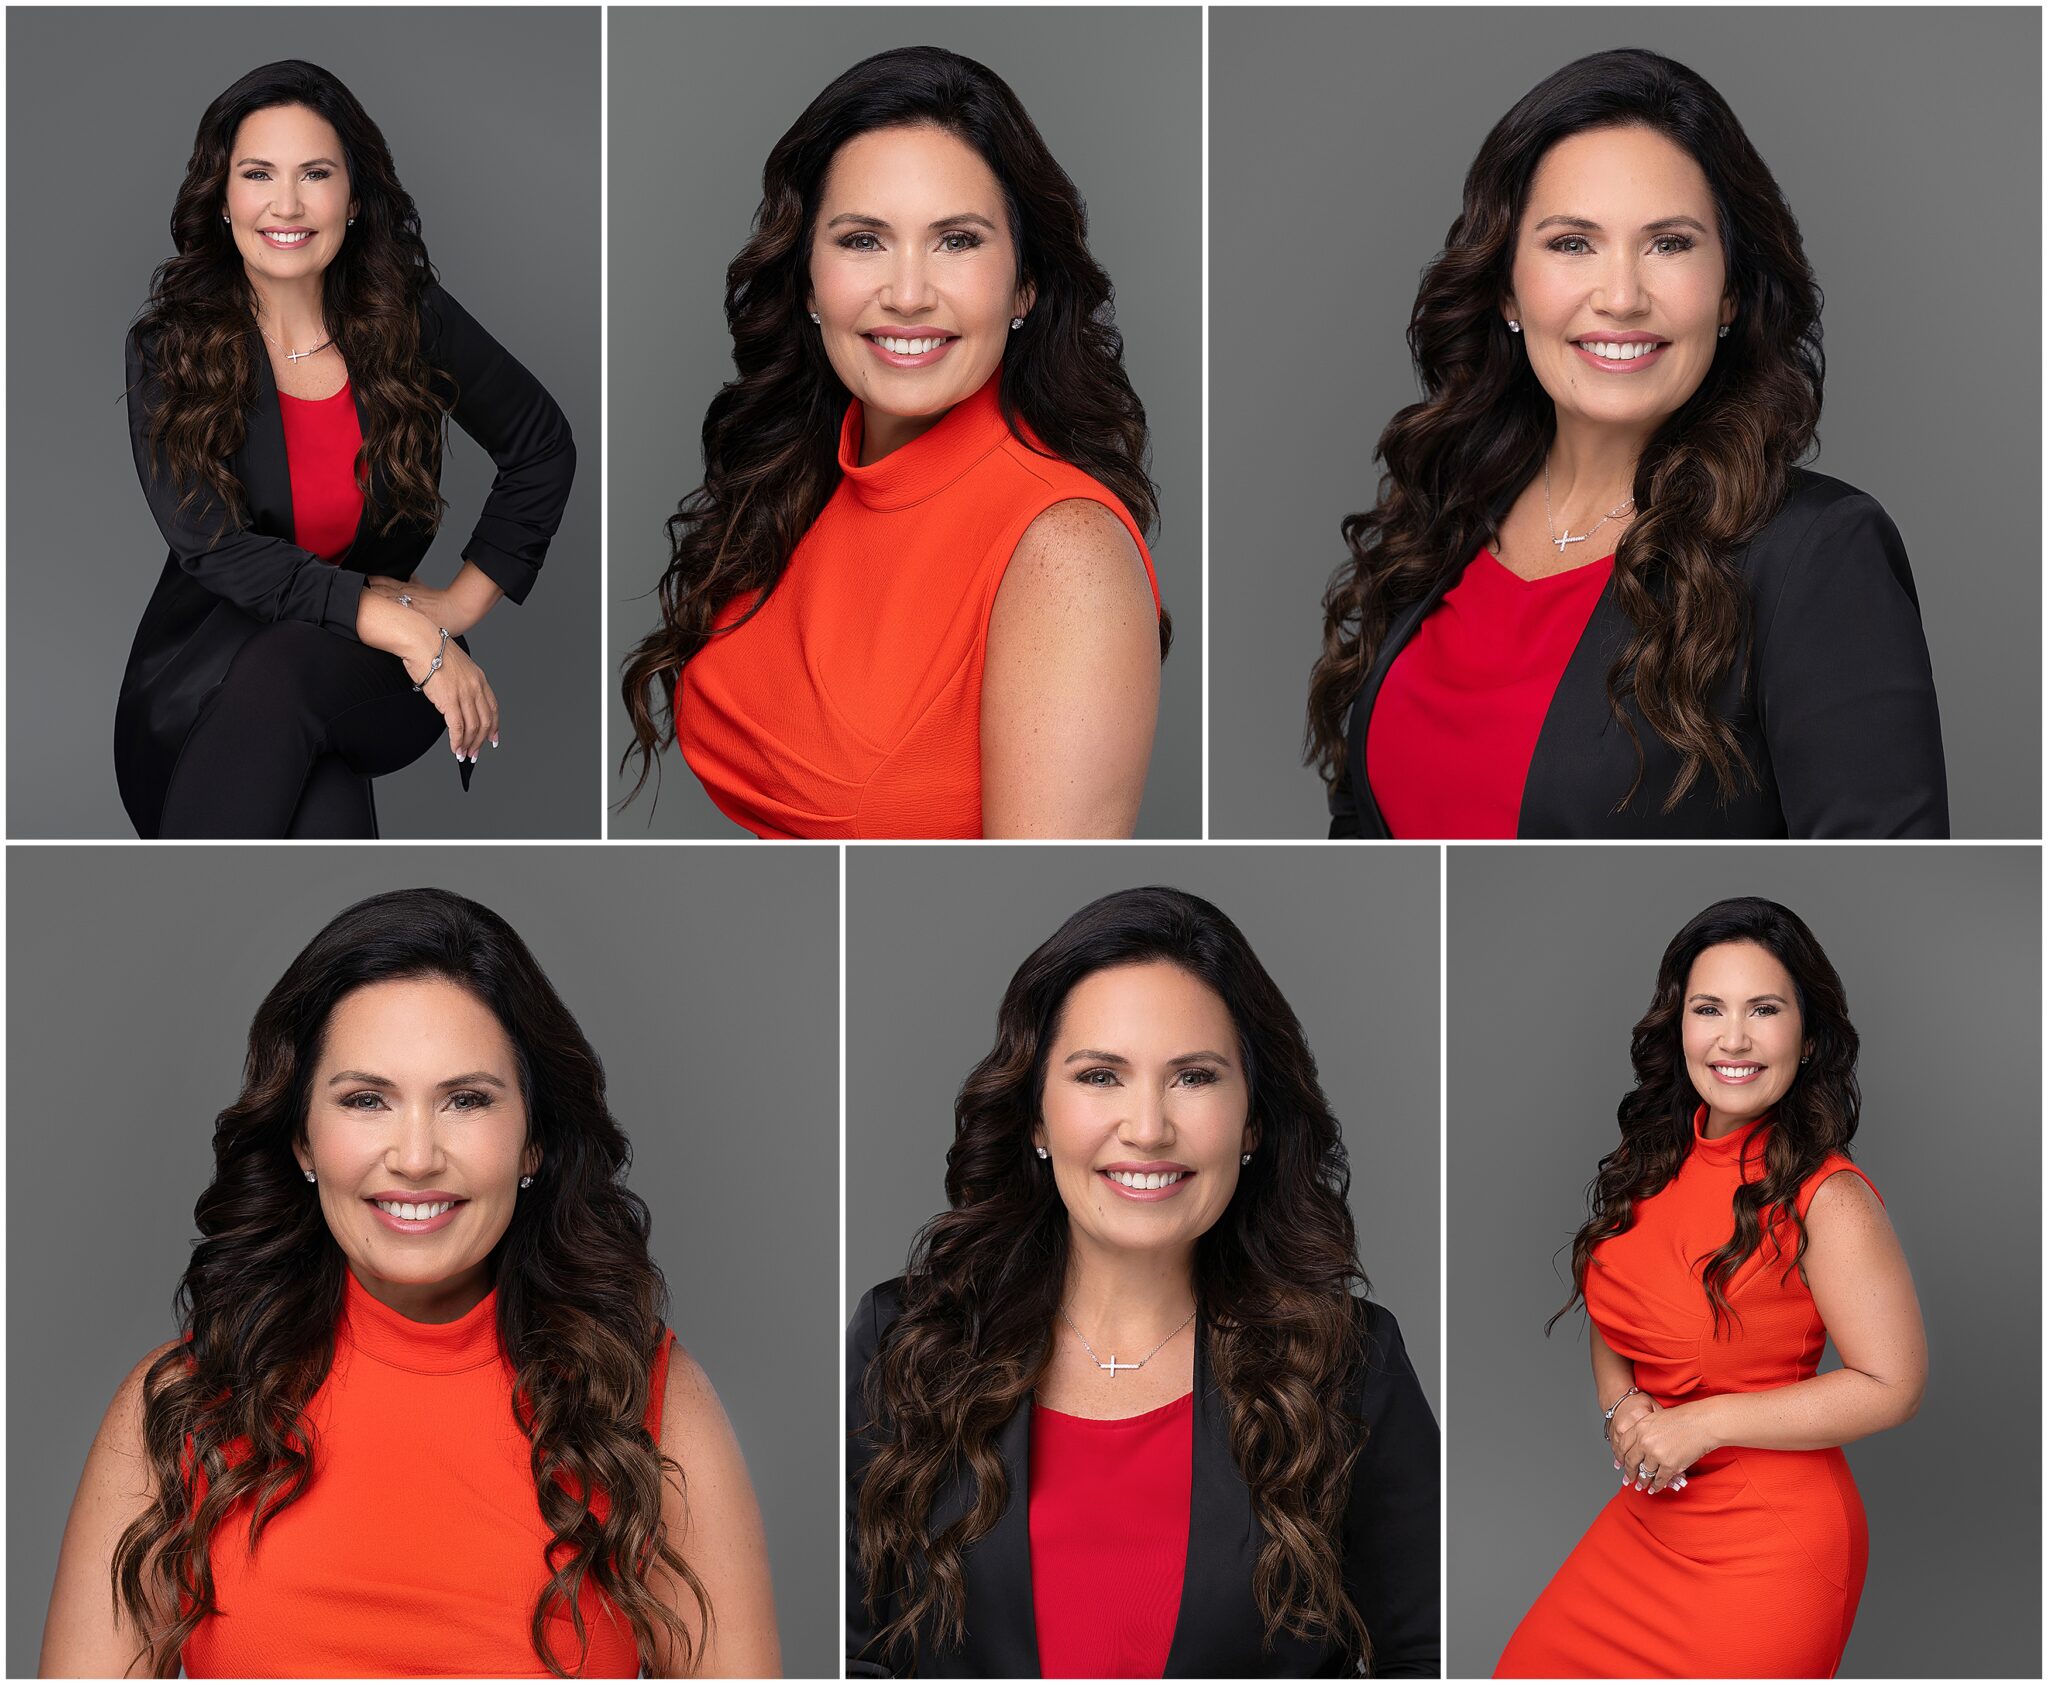 Professional-Portrait-Photography: Headshot-Session in Top-Studio, Lakeland, Central Florida